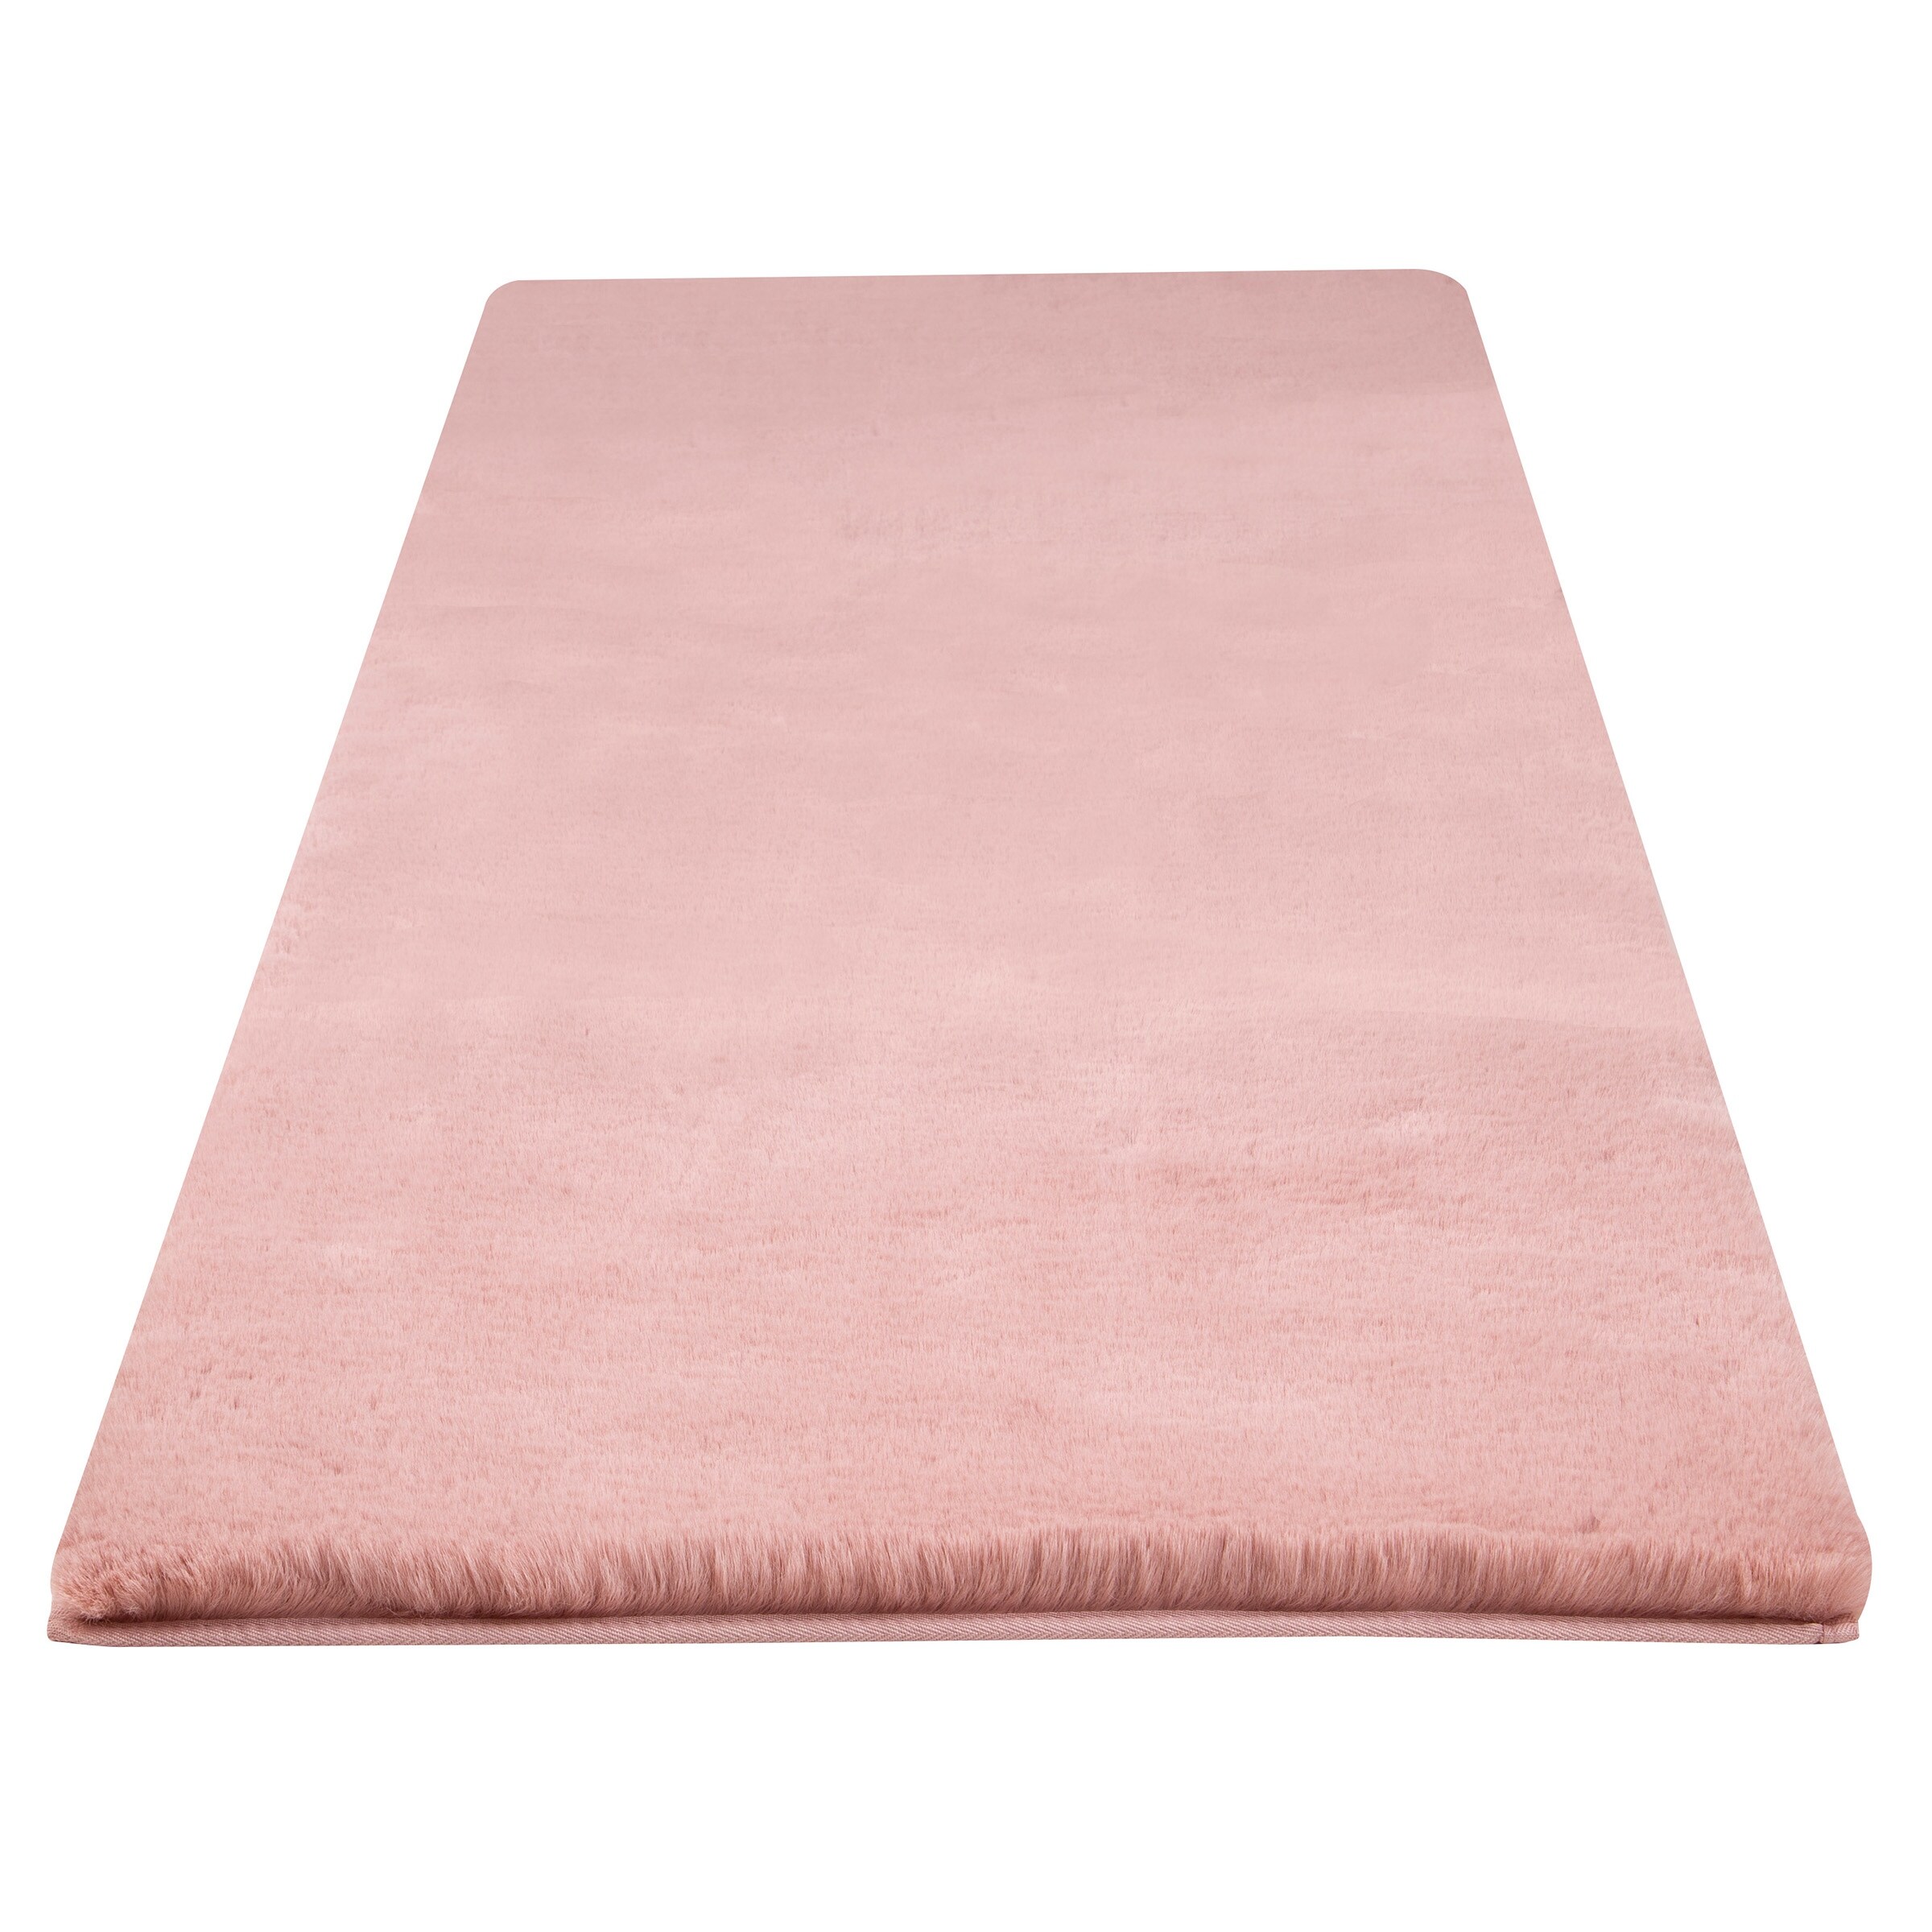 https://ak1.ostkcdn.com/images/products/is/images/direct/01c712858916e2941a1b2a093f8850457349e391/Faux-Fur-Bath-Mat---21x60-Inch-Nonslip-Rug-by-Home-Complete.jpg